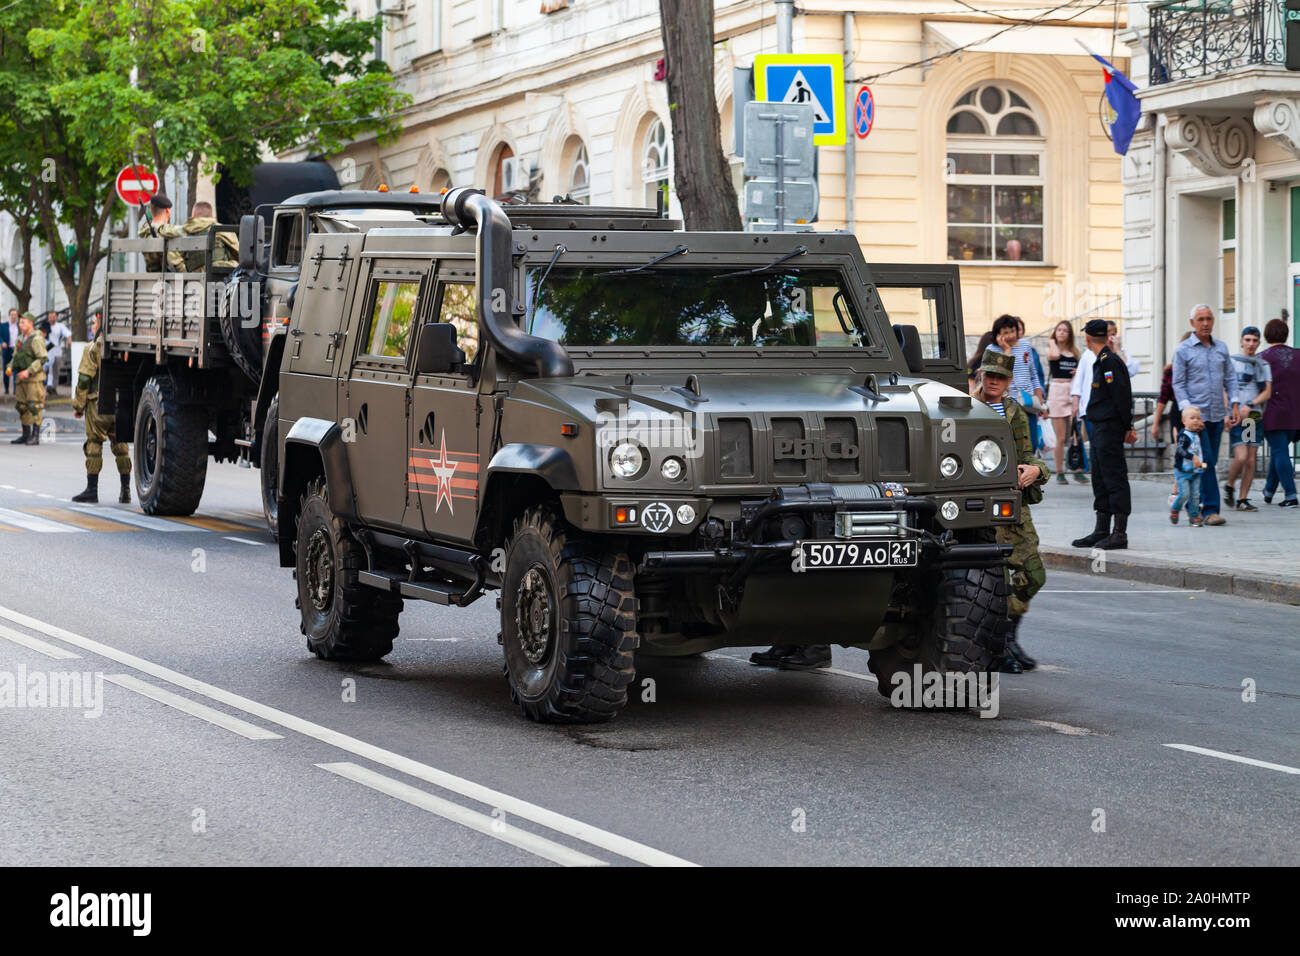 Sevastopol, Crimea - May 5, 2018: Iveco LMV military car stands on a street. This Light Multirole Vehicle is a 4WD tactical vehicle developed by Iveco Stock Photo